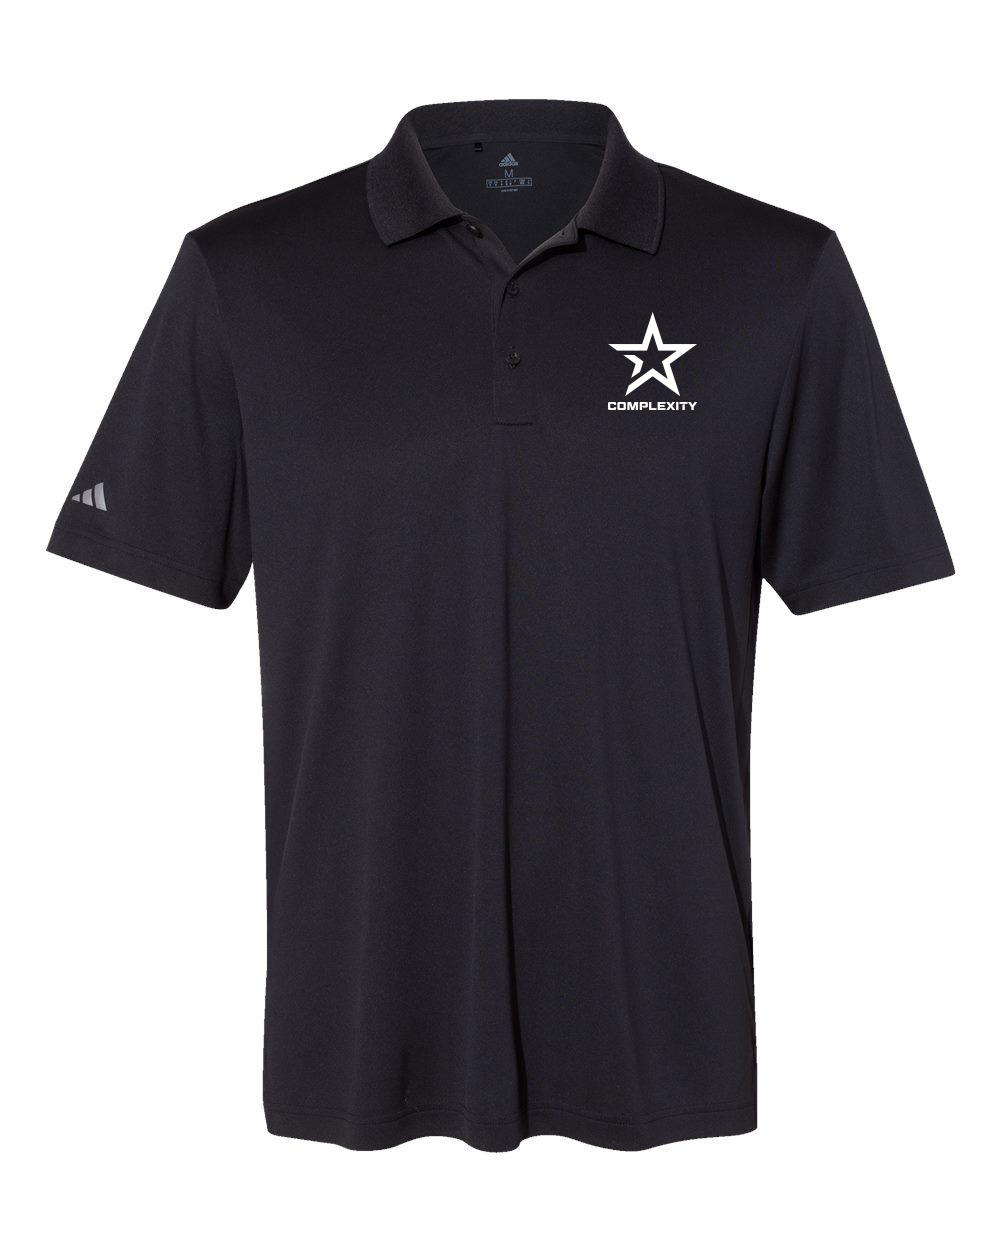 Complexity Adidas Performance Polo